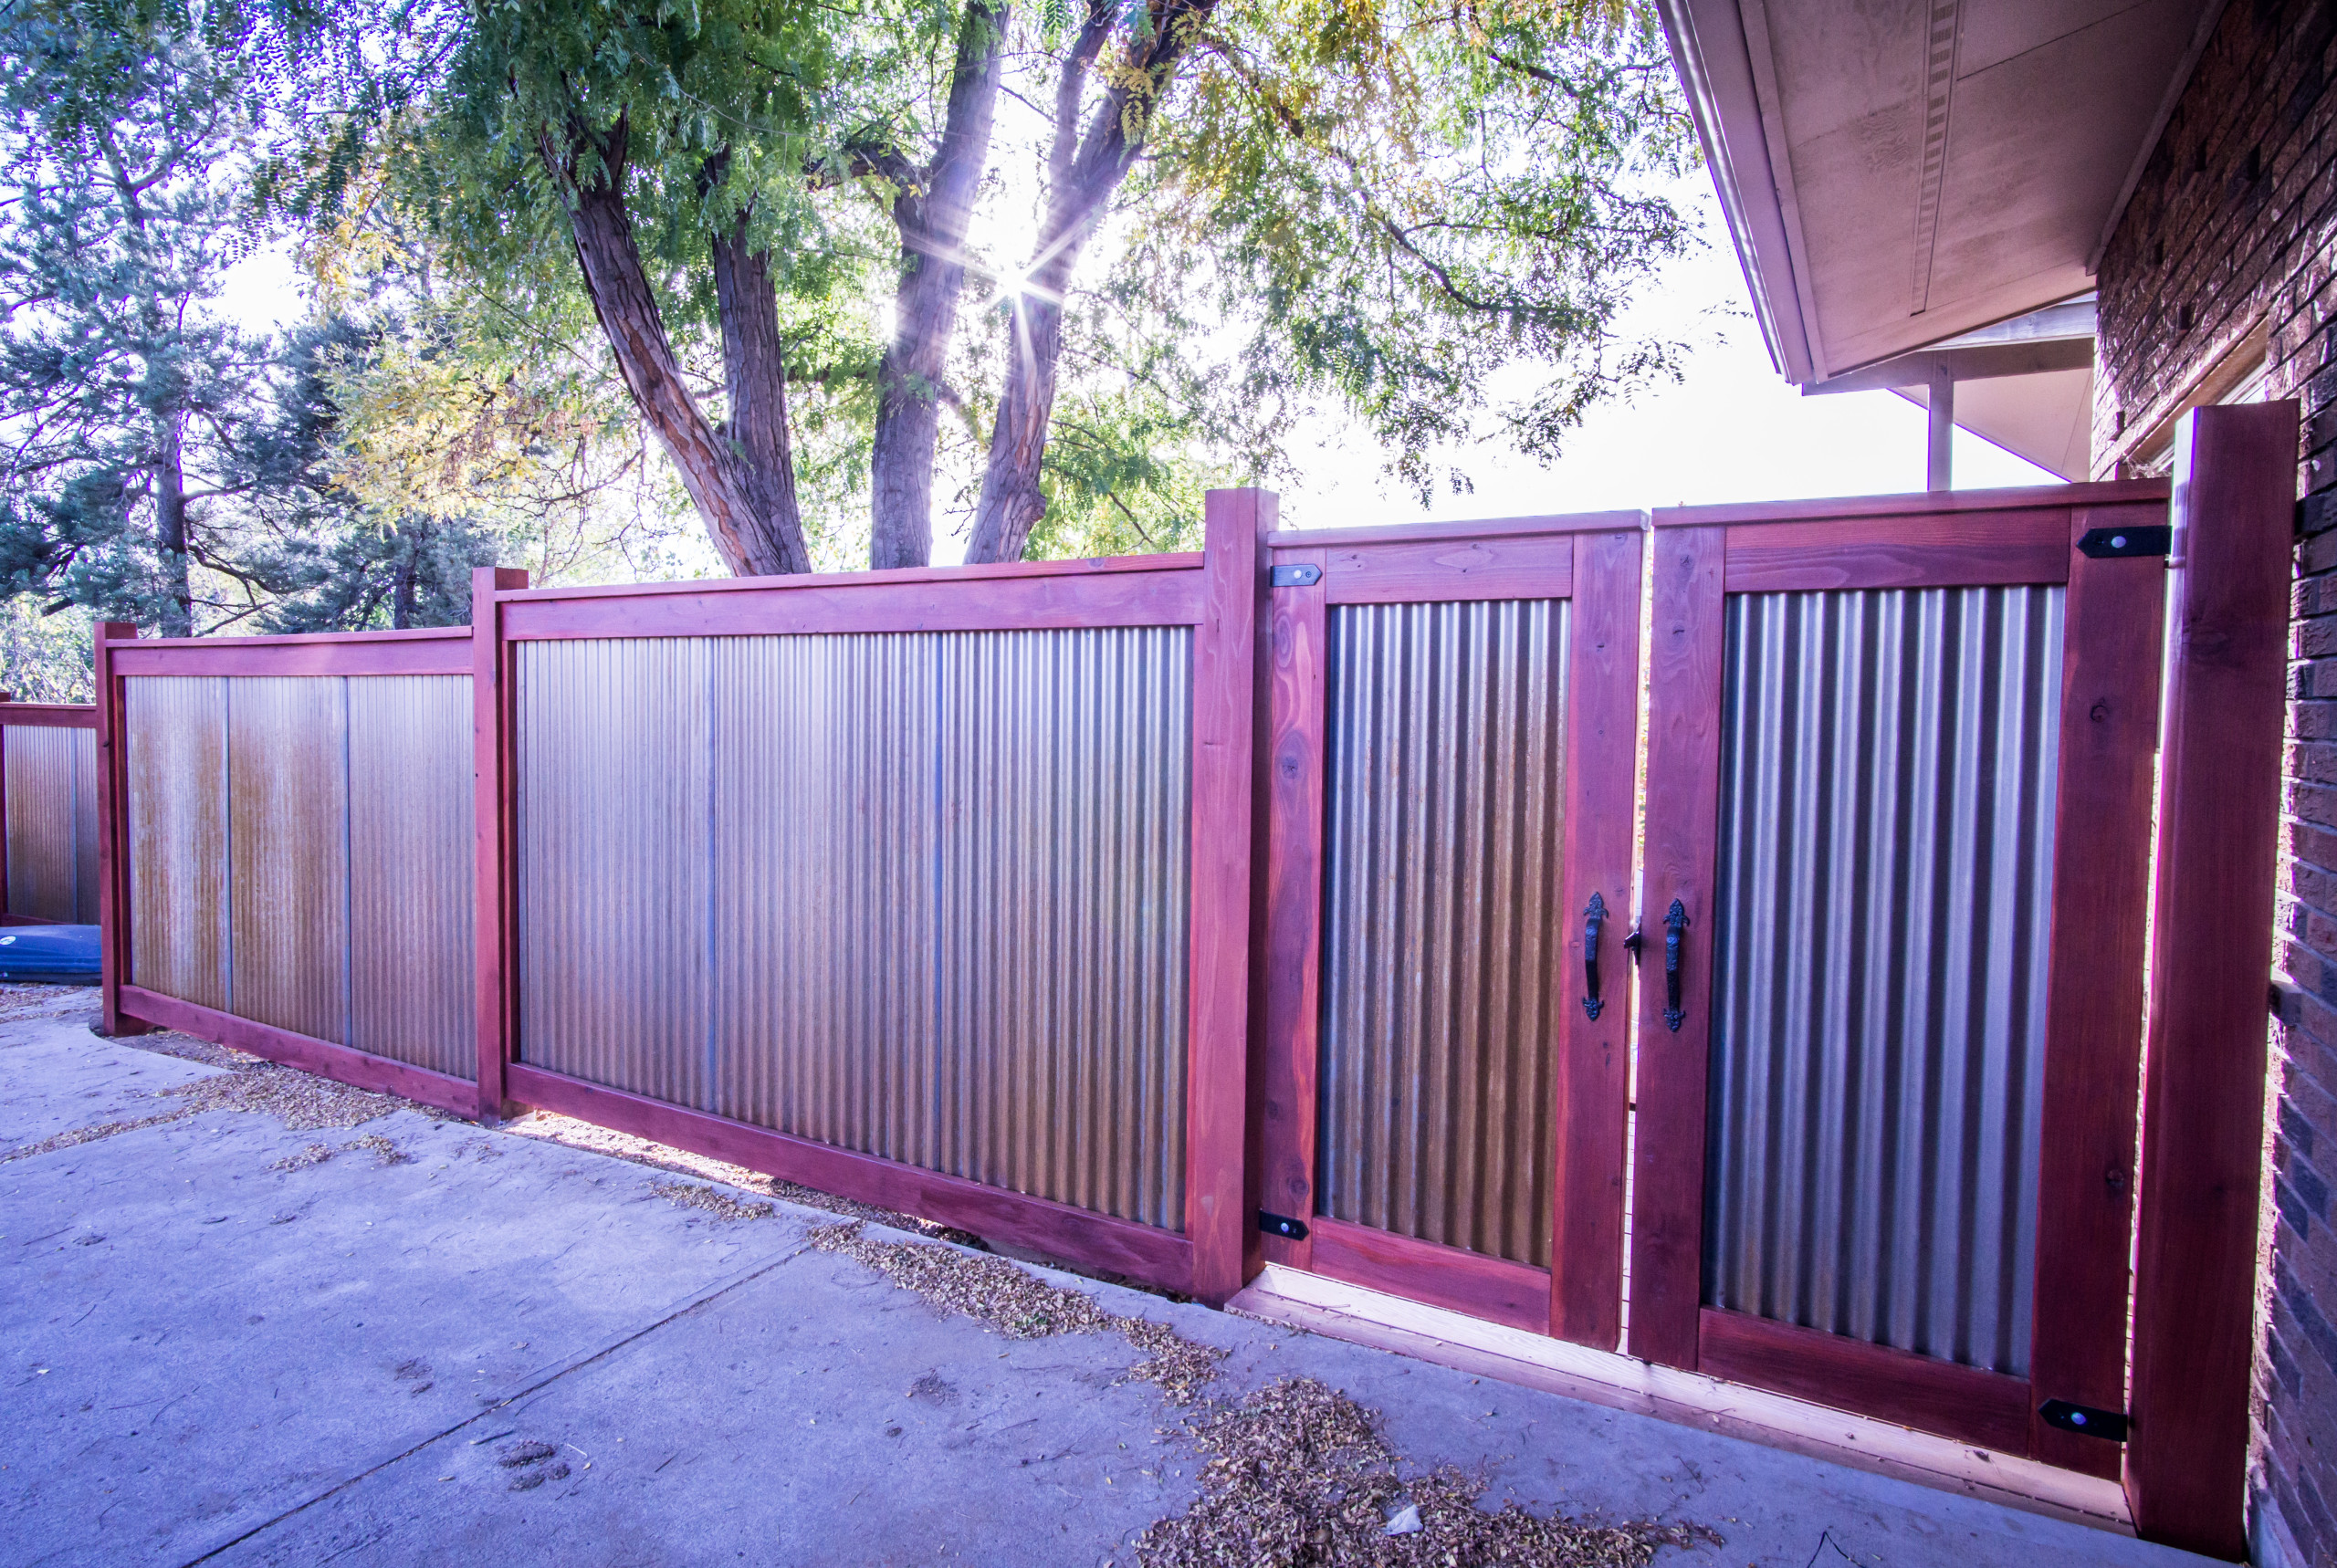 Corrugated Metal Fence Houzz, Corrugated Metal Fence Panels Canada